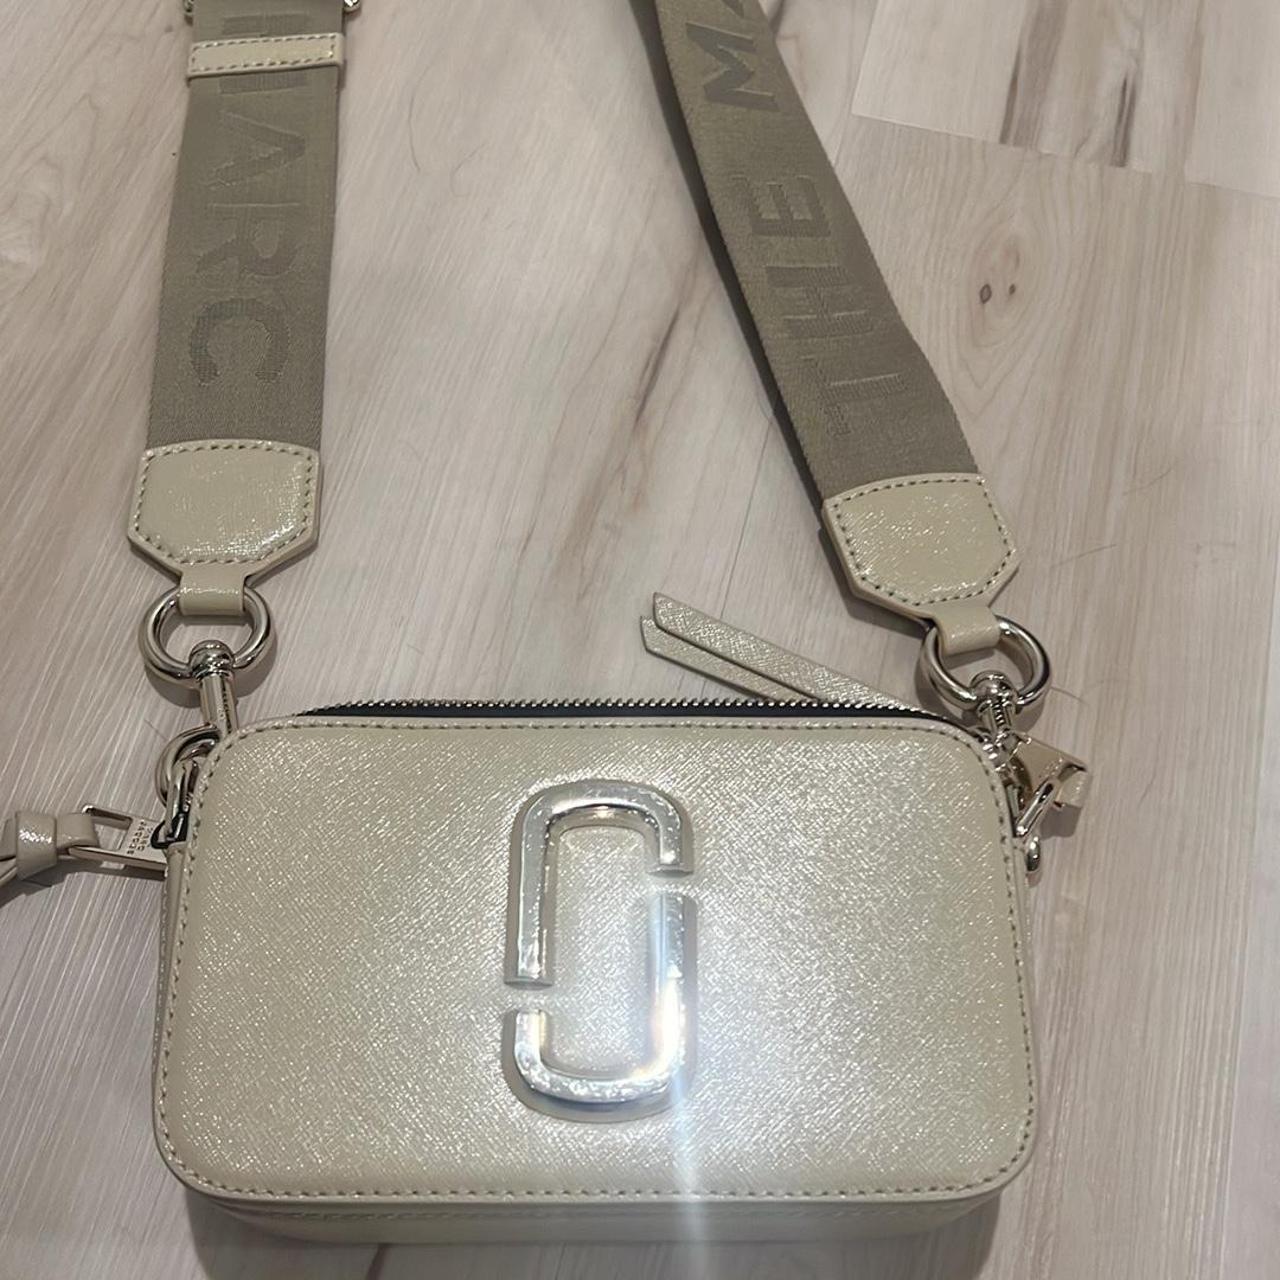 Marc Jacobs Snapshot purse This is still brand new - Depop